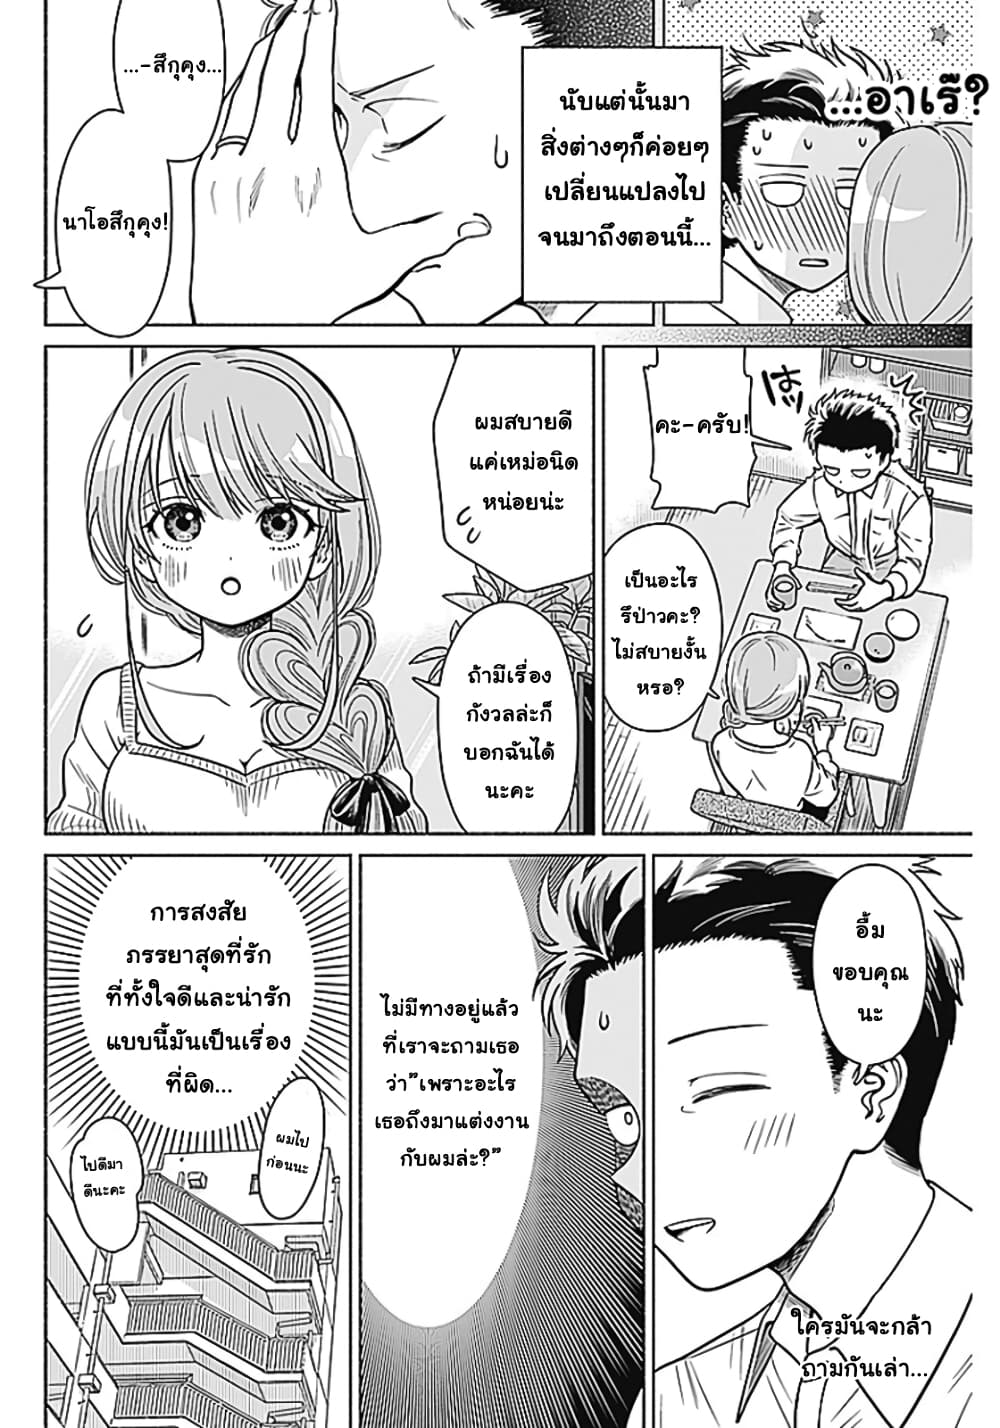 Marriage Gray 1 (9)